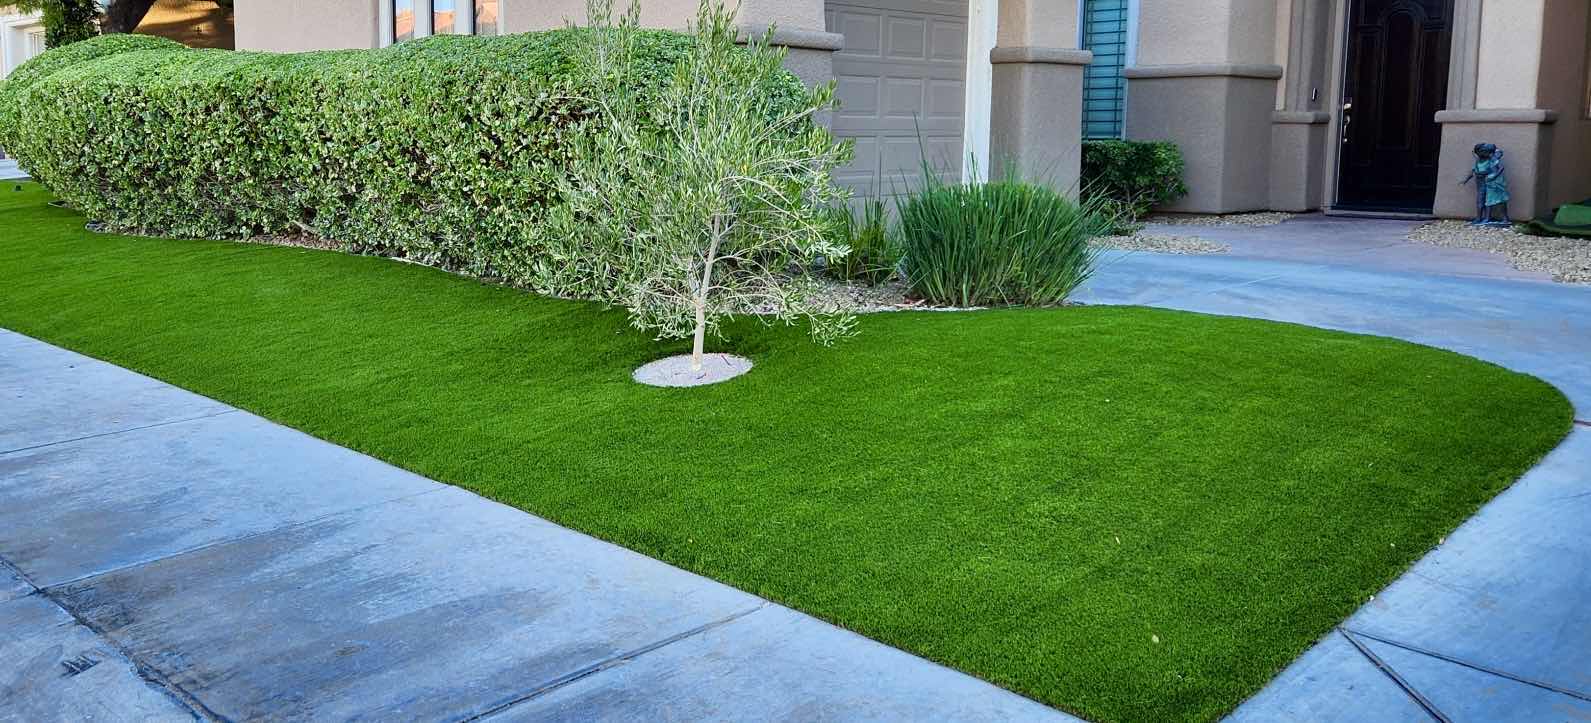 Photo 1 of SUPREME PREMIUM QUALITY ARTIFICIAL TURF GRASS 15’ X 100’ (1500 TOTAL SQ FT) ANTHEM COUNTRY CLUB APPROVED TOTAL TURF HEIGHT 1.97”